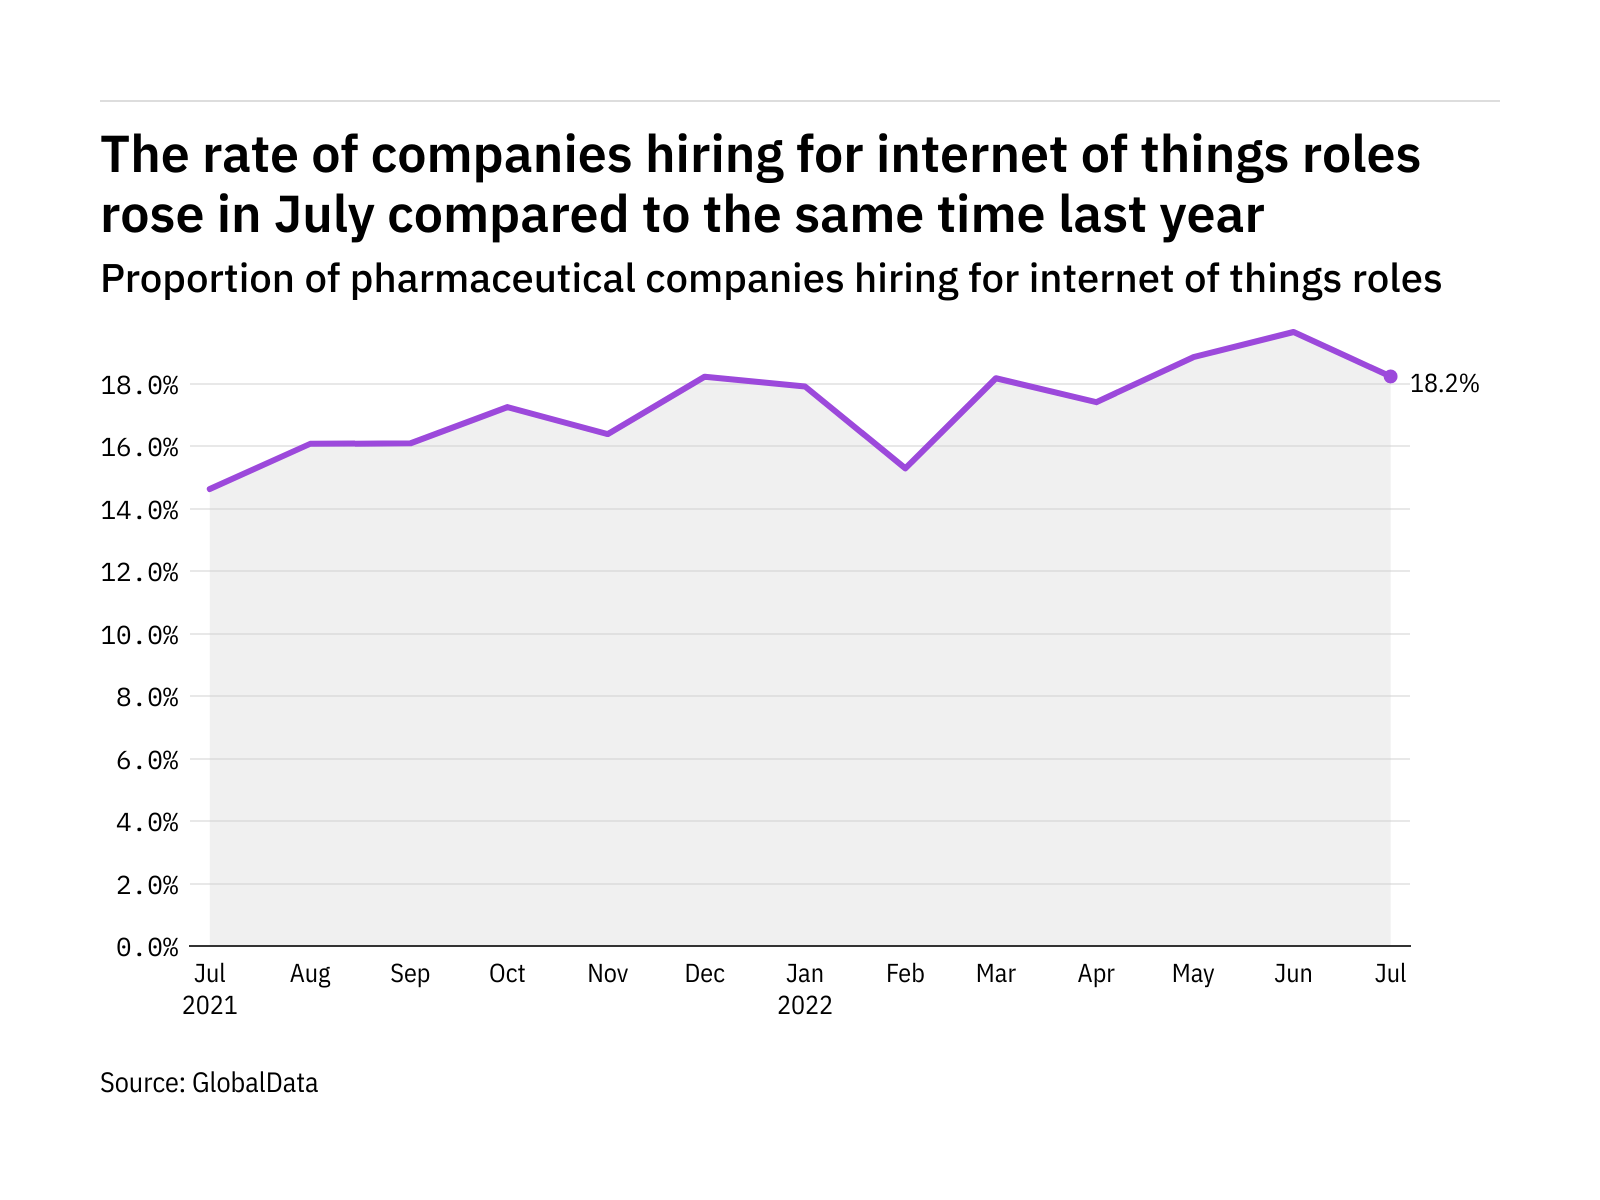 Internet of things hiring levels in the pharmaceutical industry rose in July 2022